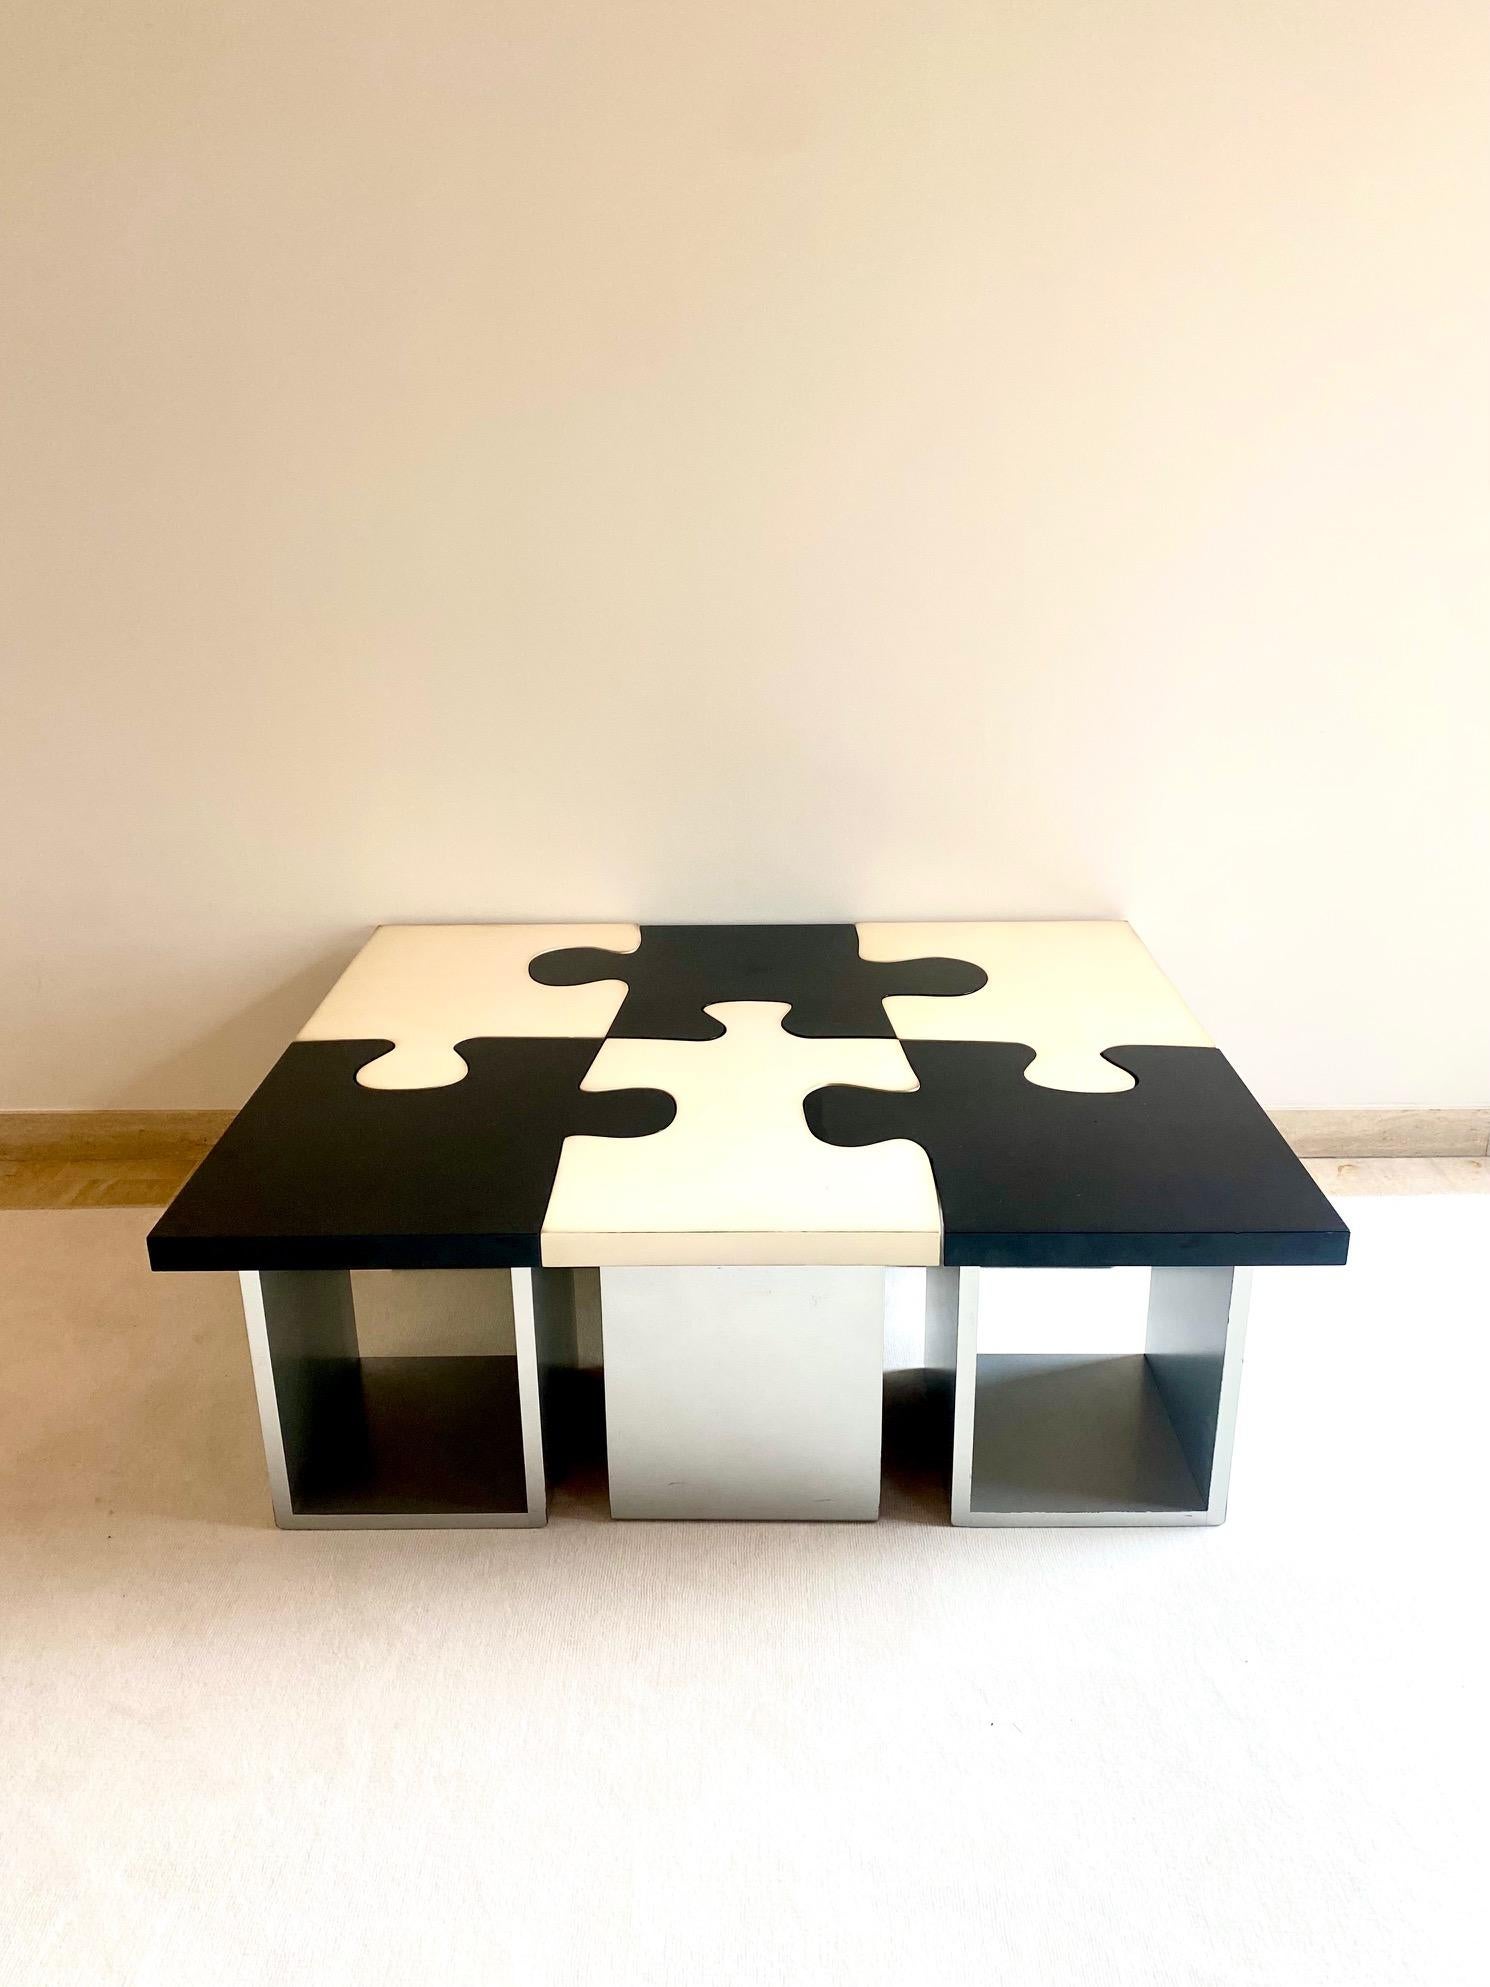 Rare puzzle table from the 1970s!
Six pieces of black and white puzzle.

Good condition.